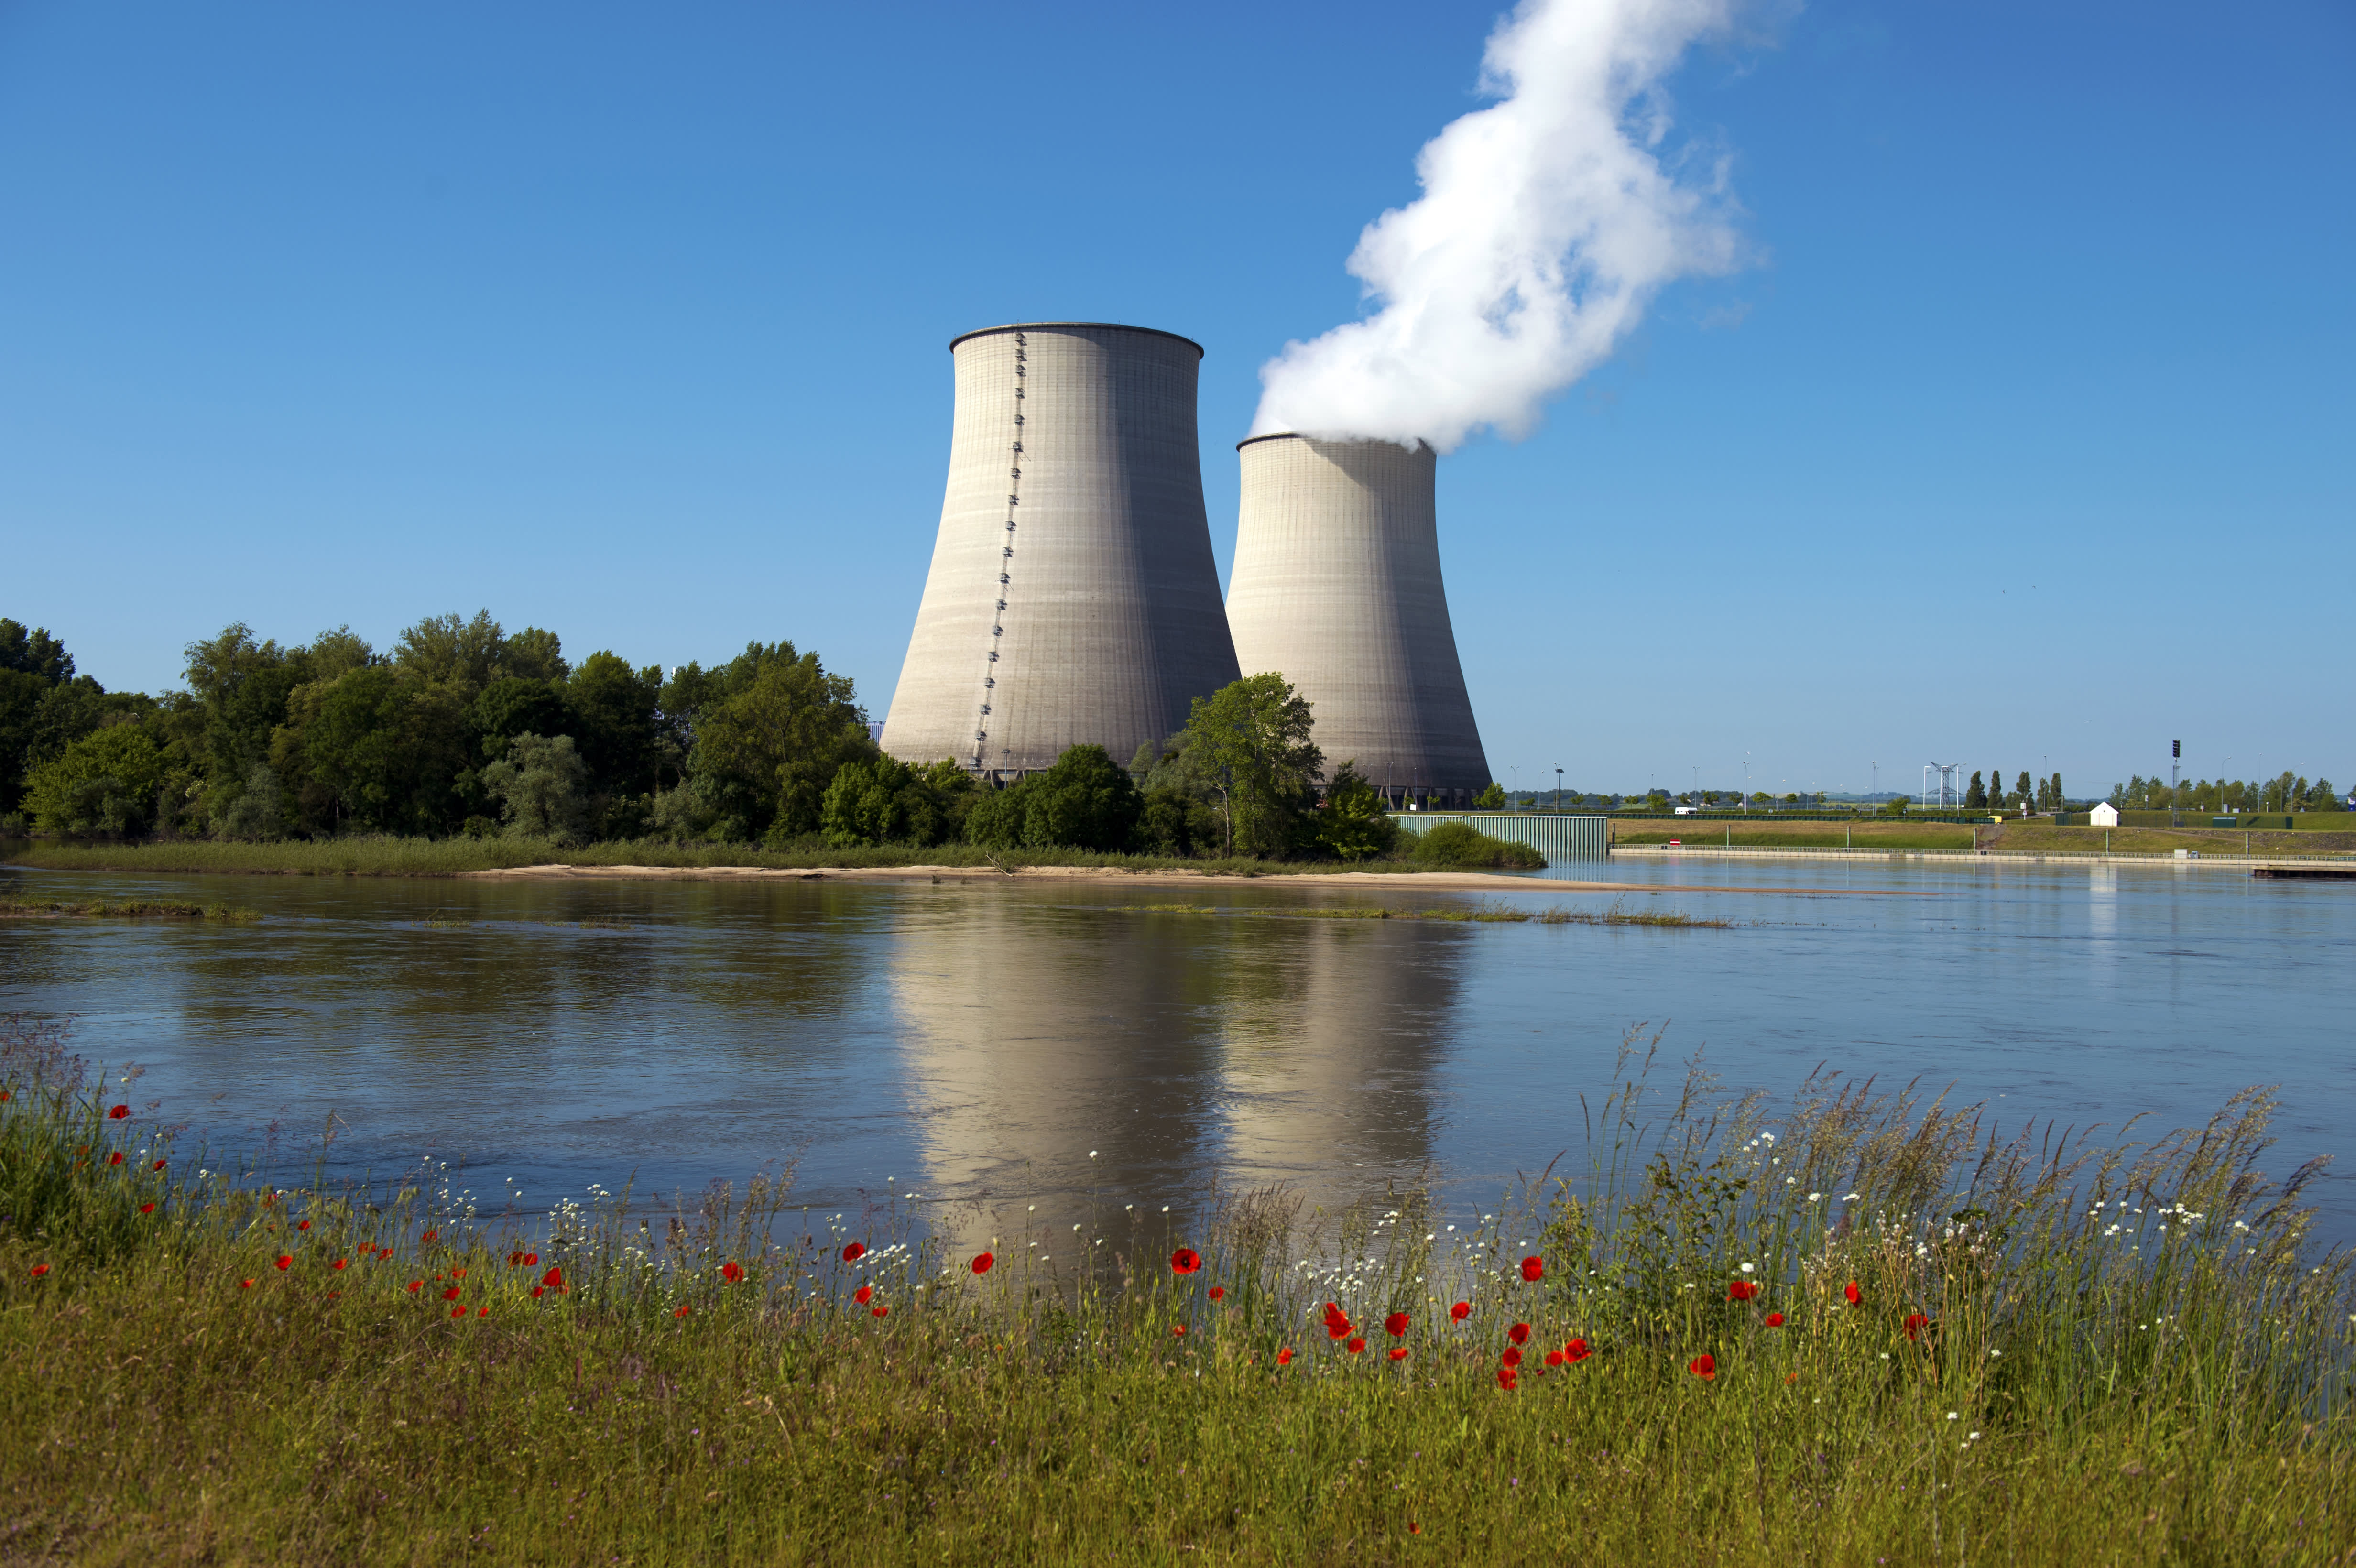 France’s love affair with nuclear power will continue, but change is underway